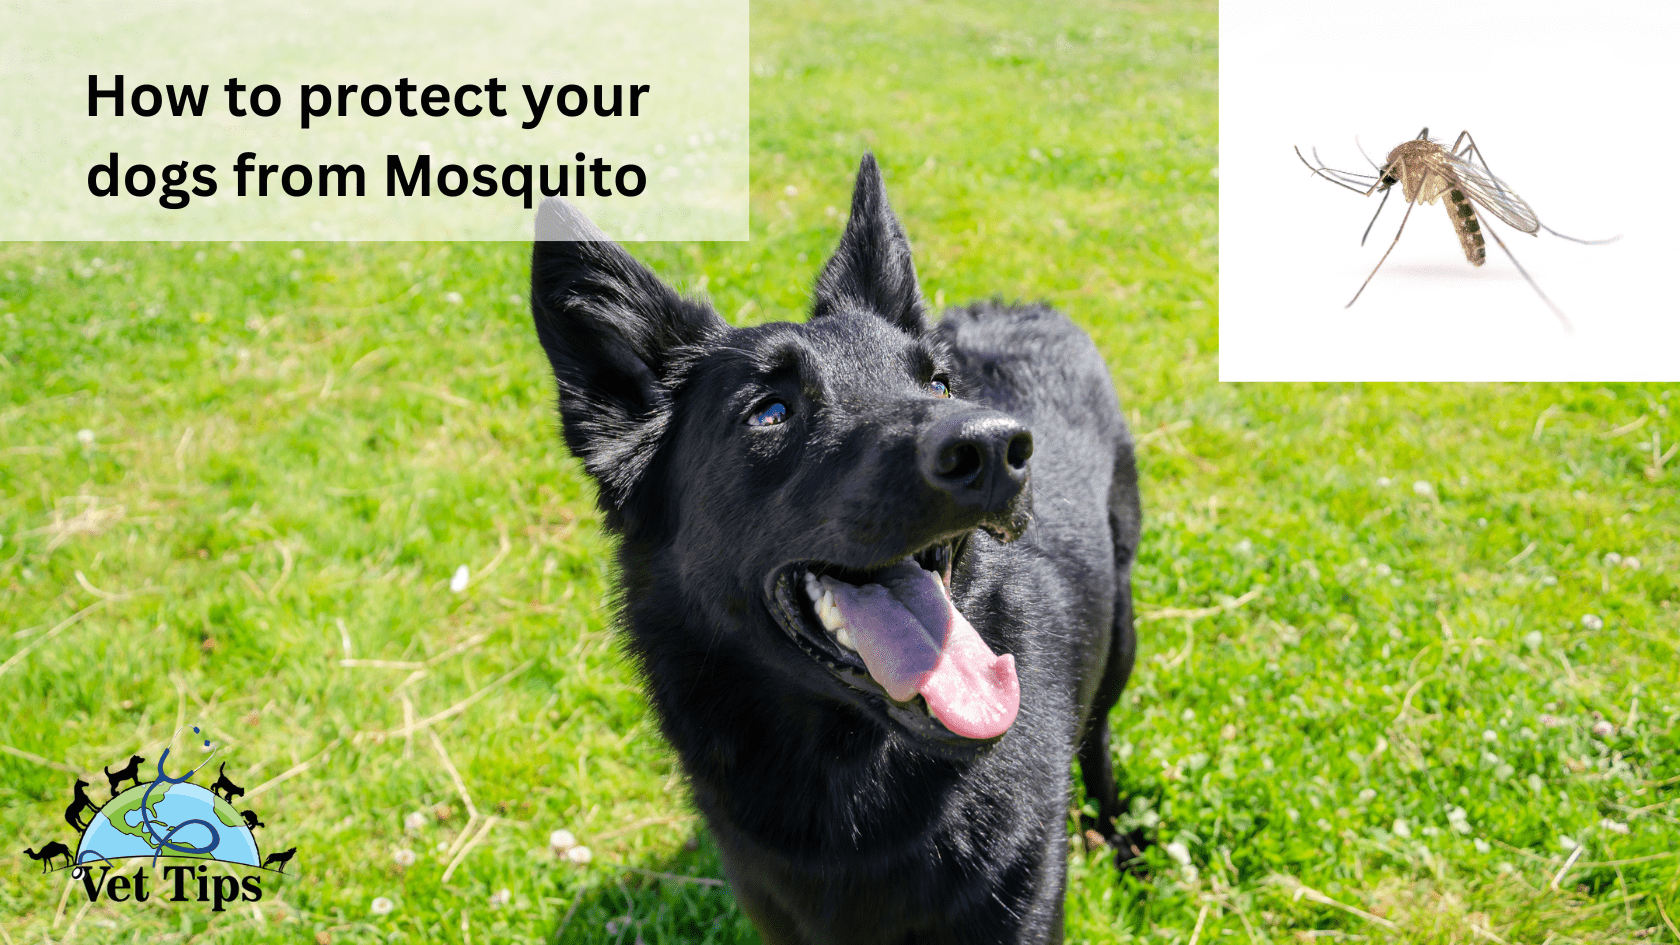 How to protect your dogs from Mosquito